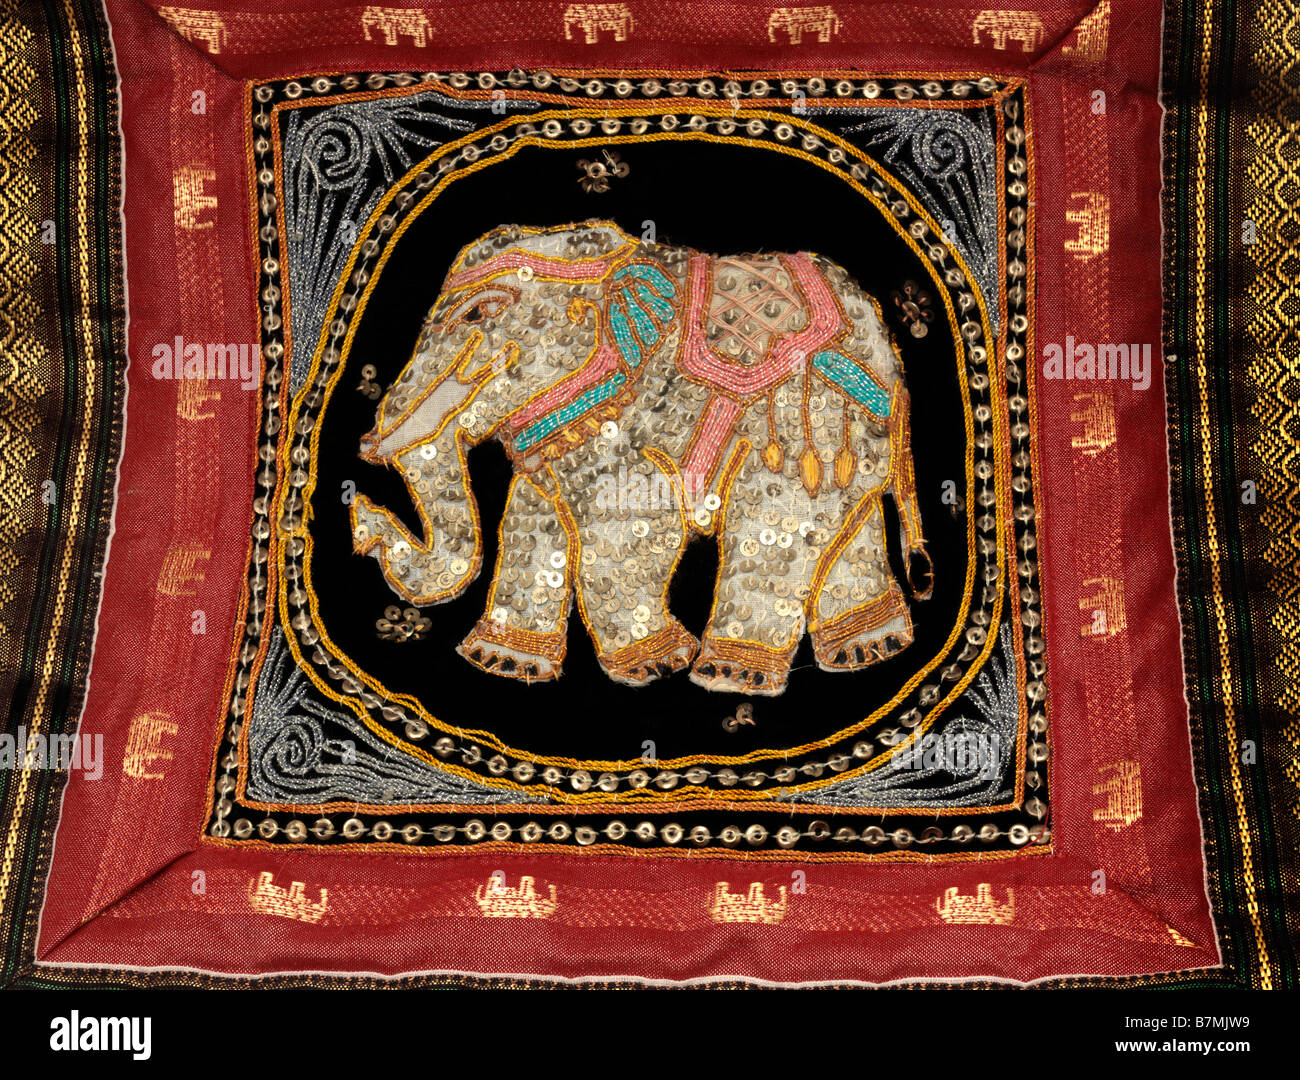 Ganesh Hindu Elephant God of Luck the Remover of Obstacles and Lord of Beginnings on Embroidered Silk Cushion Indian Craft Stock Photo